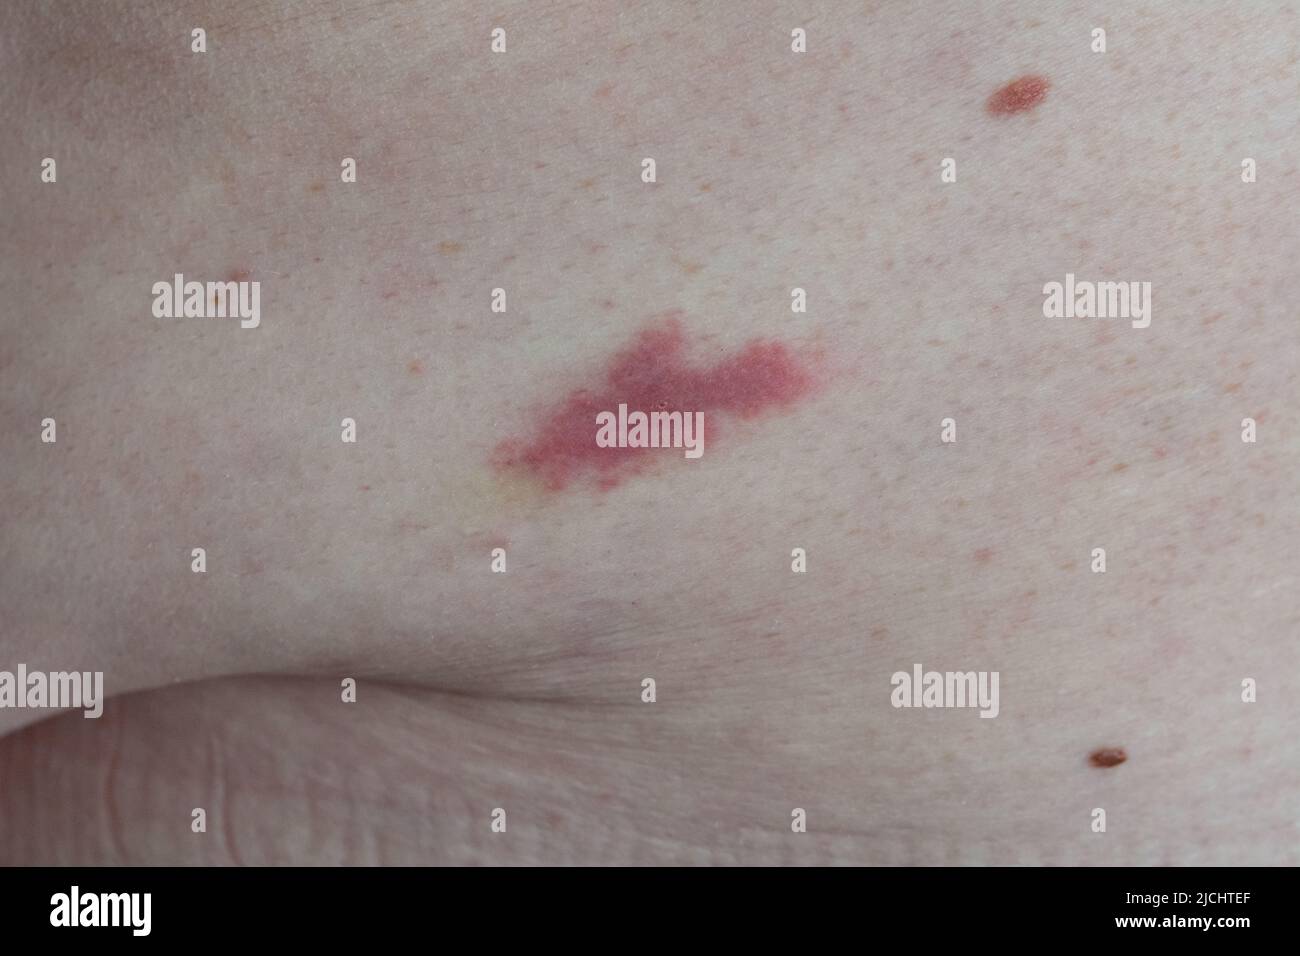 Irritation from an insect bite. Trace irritation from a bite by an unknown insect on the waist of an overweight white European man Stock Photo